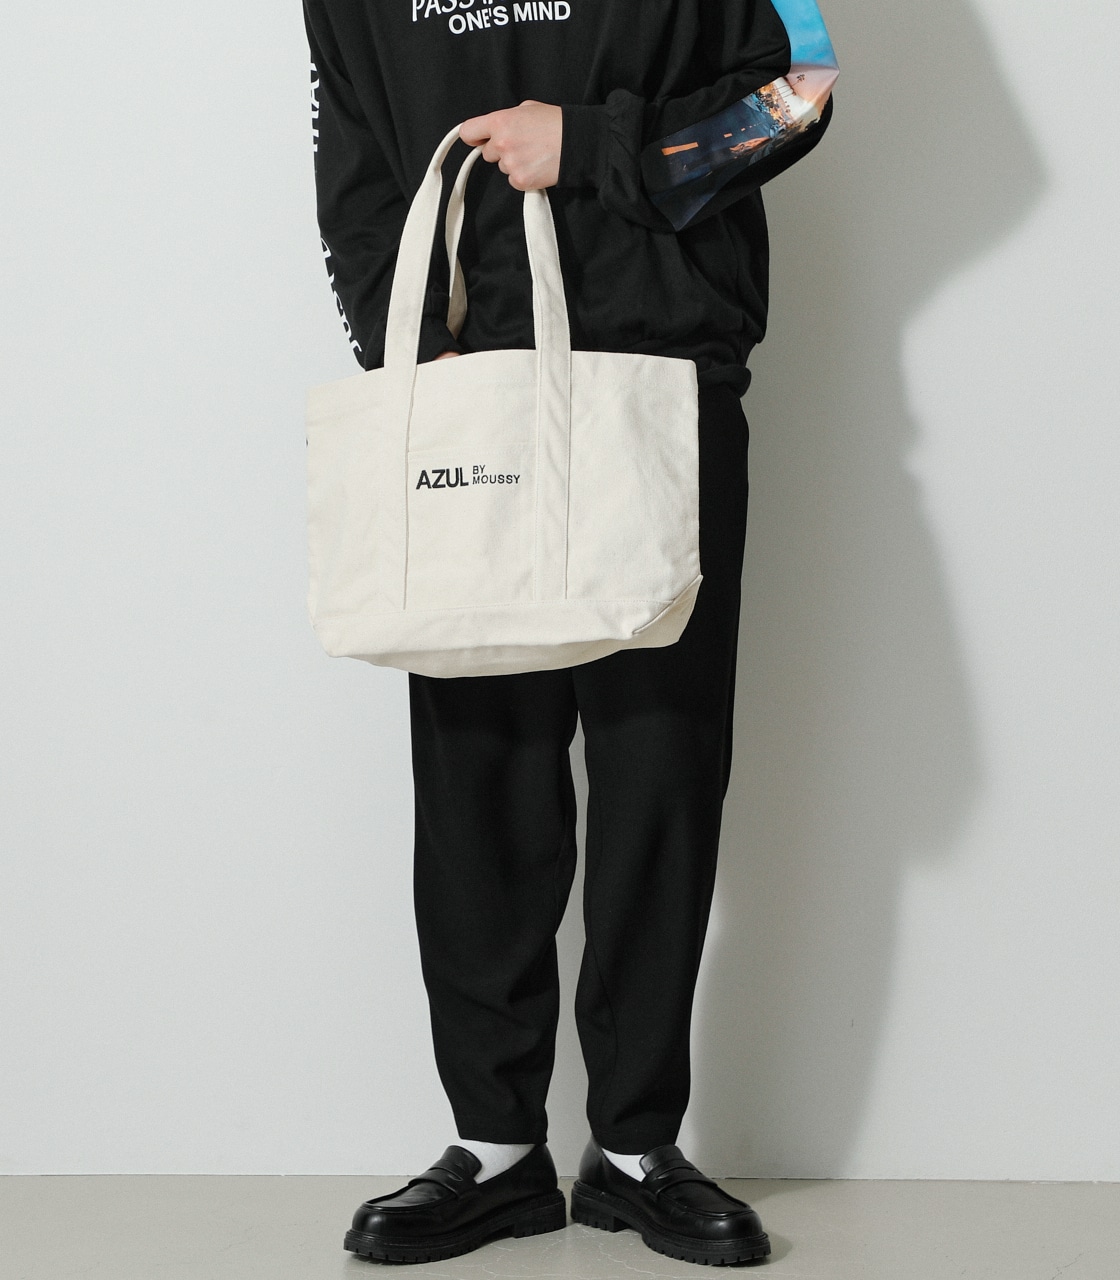 AZUL CANVAS BIG TOTE BAG/AZULキャンバスビッグトートバッグ｜AZUL BY MOUSSY（アズール バイマウジー）公式通販サイト